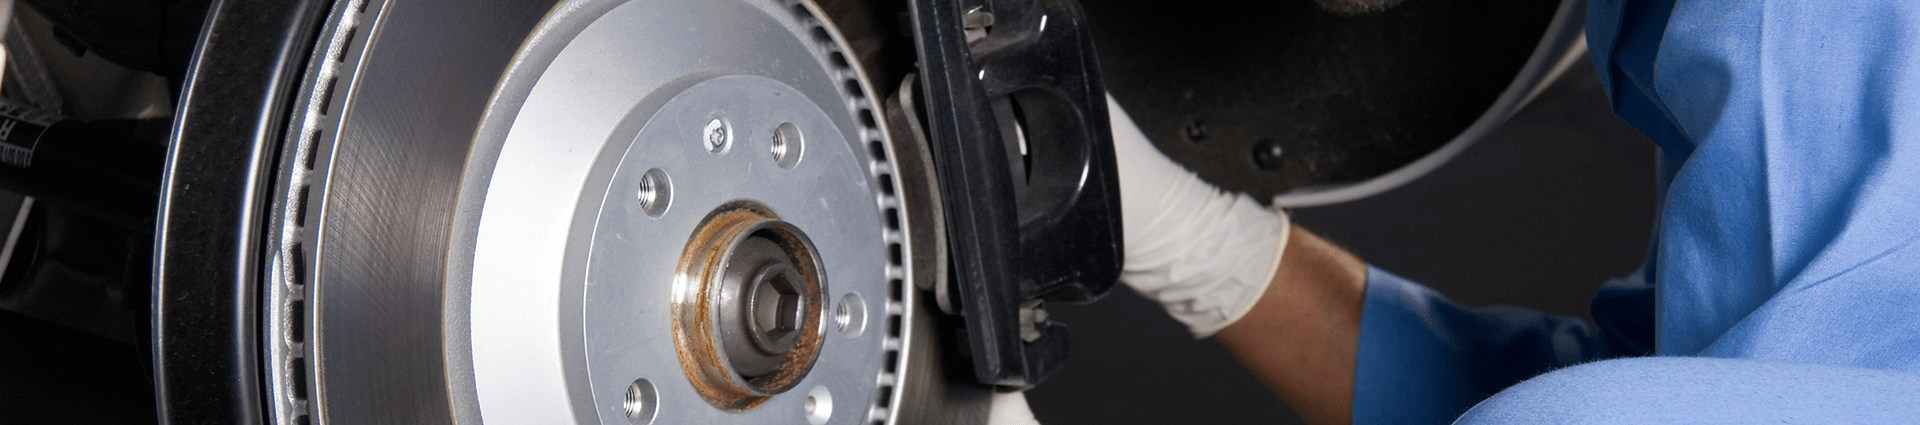 car brakes with mechanic